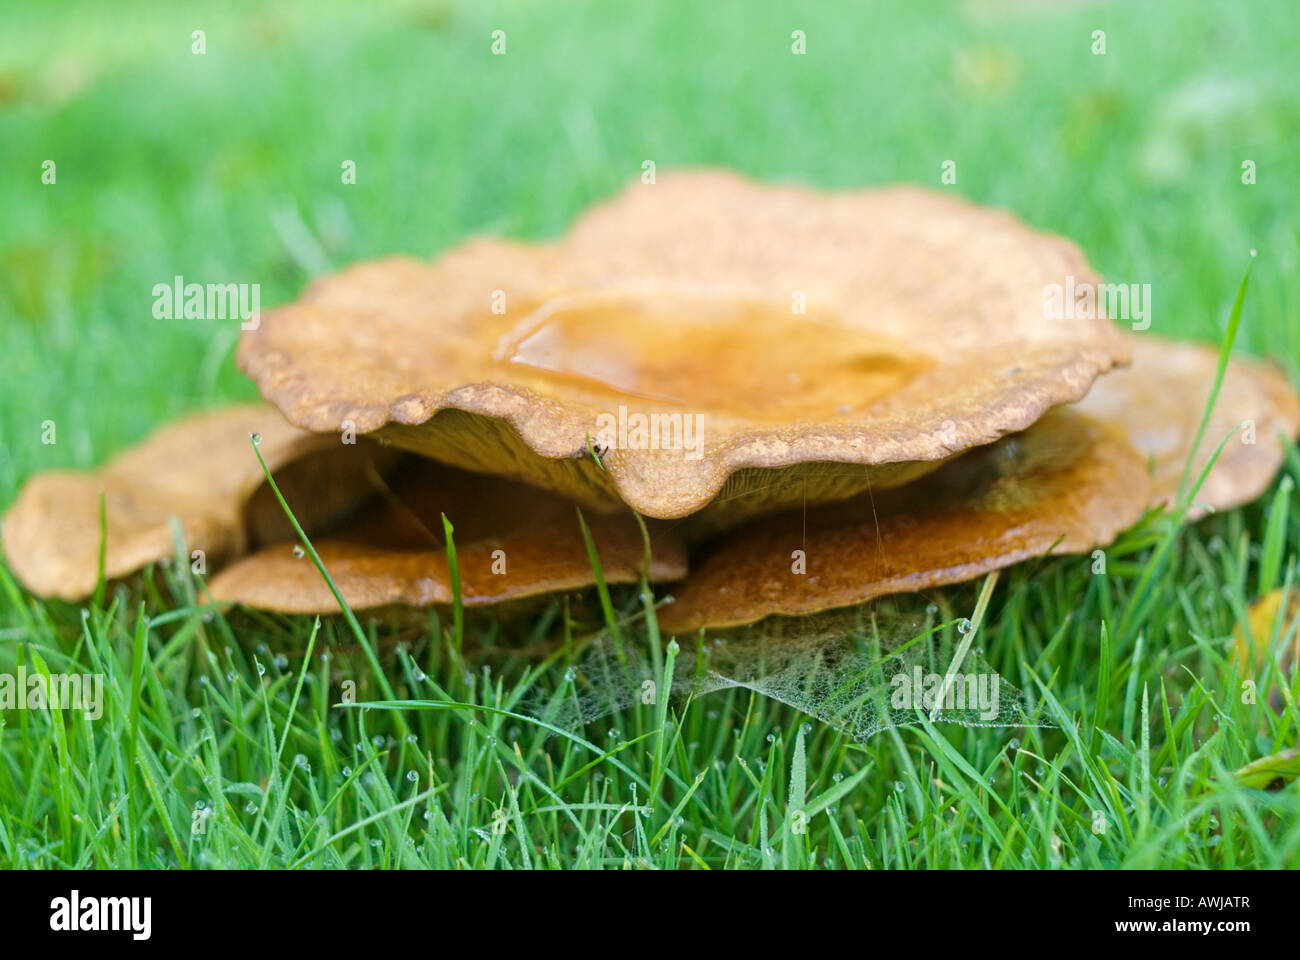 A mushroom growing on a lawn Stock Photo